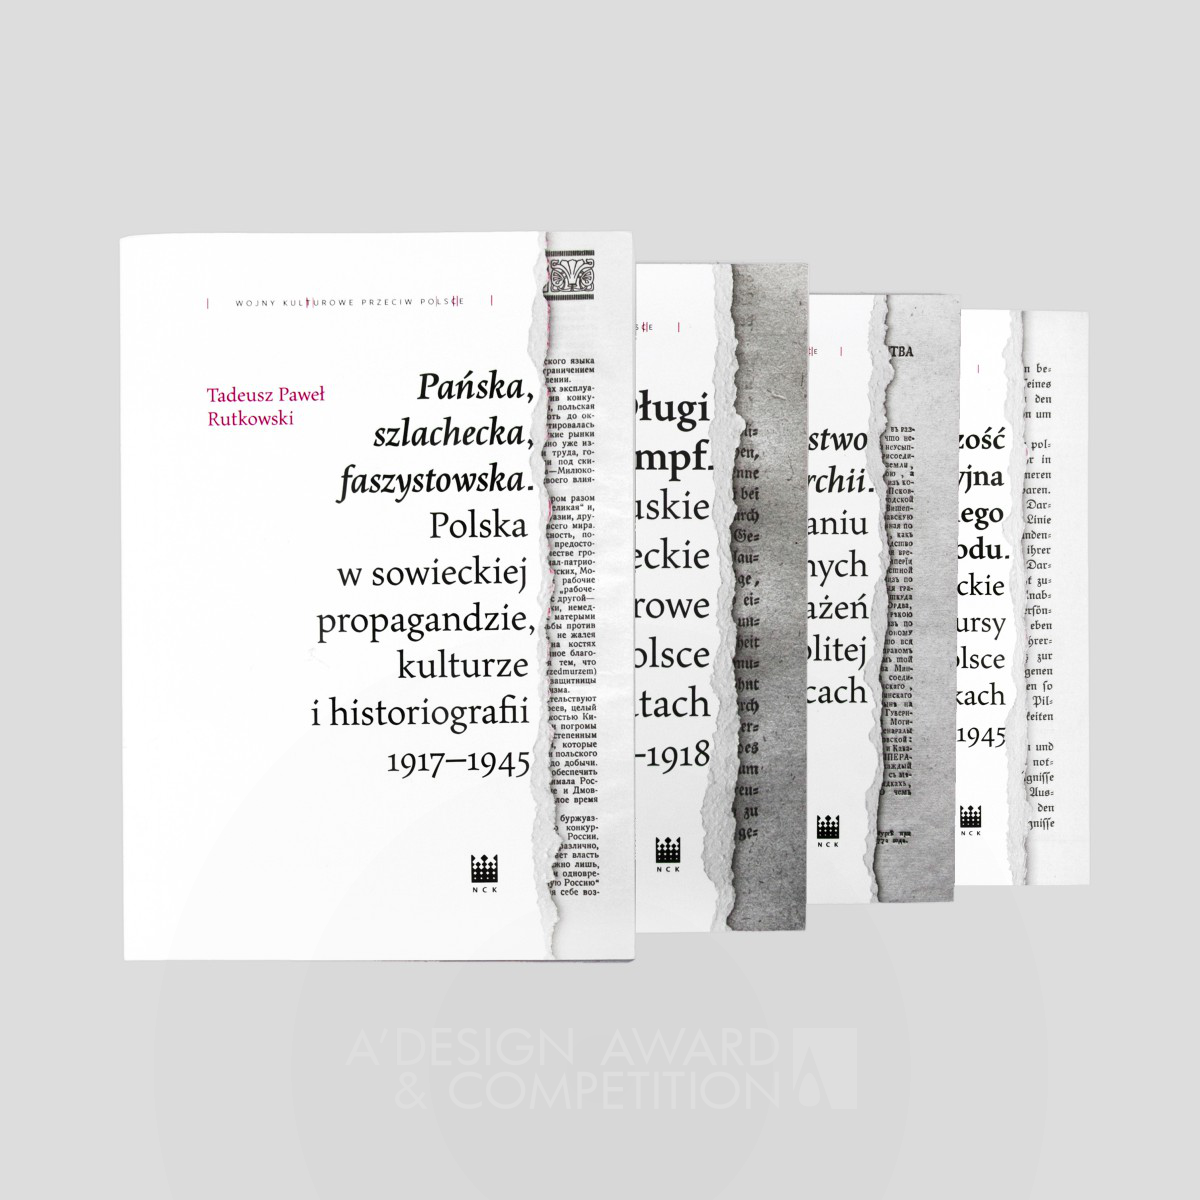 Aleksandra Toborowicz wins Silver at the prestigious A' Print and Published Media Design Award with Cultural Wars Against Poland Book Series.